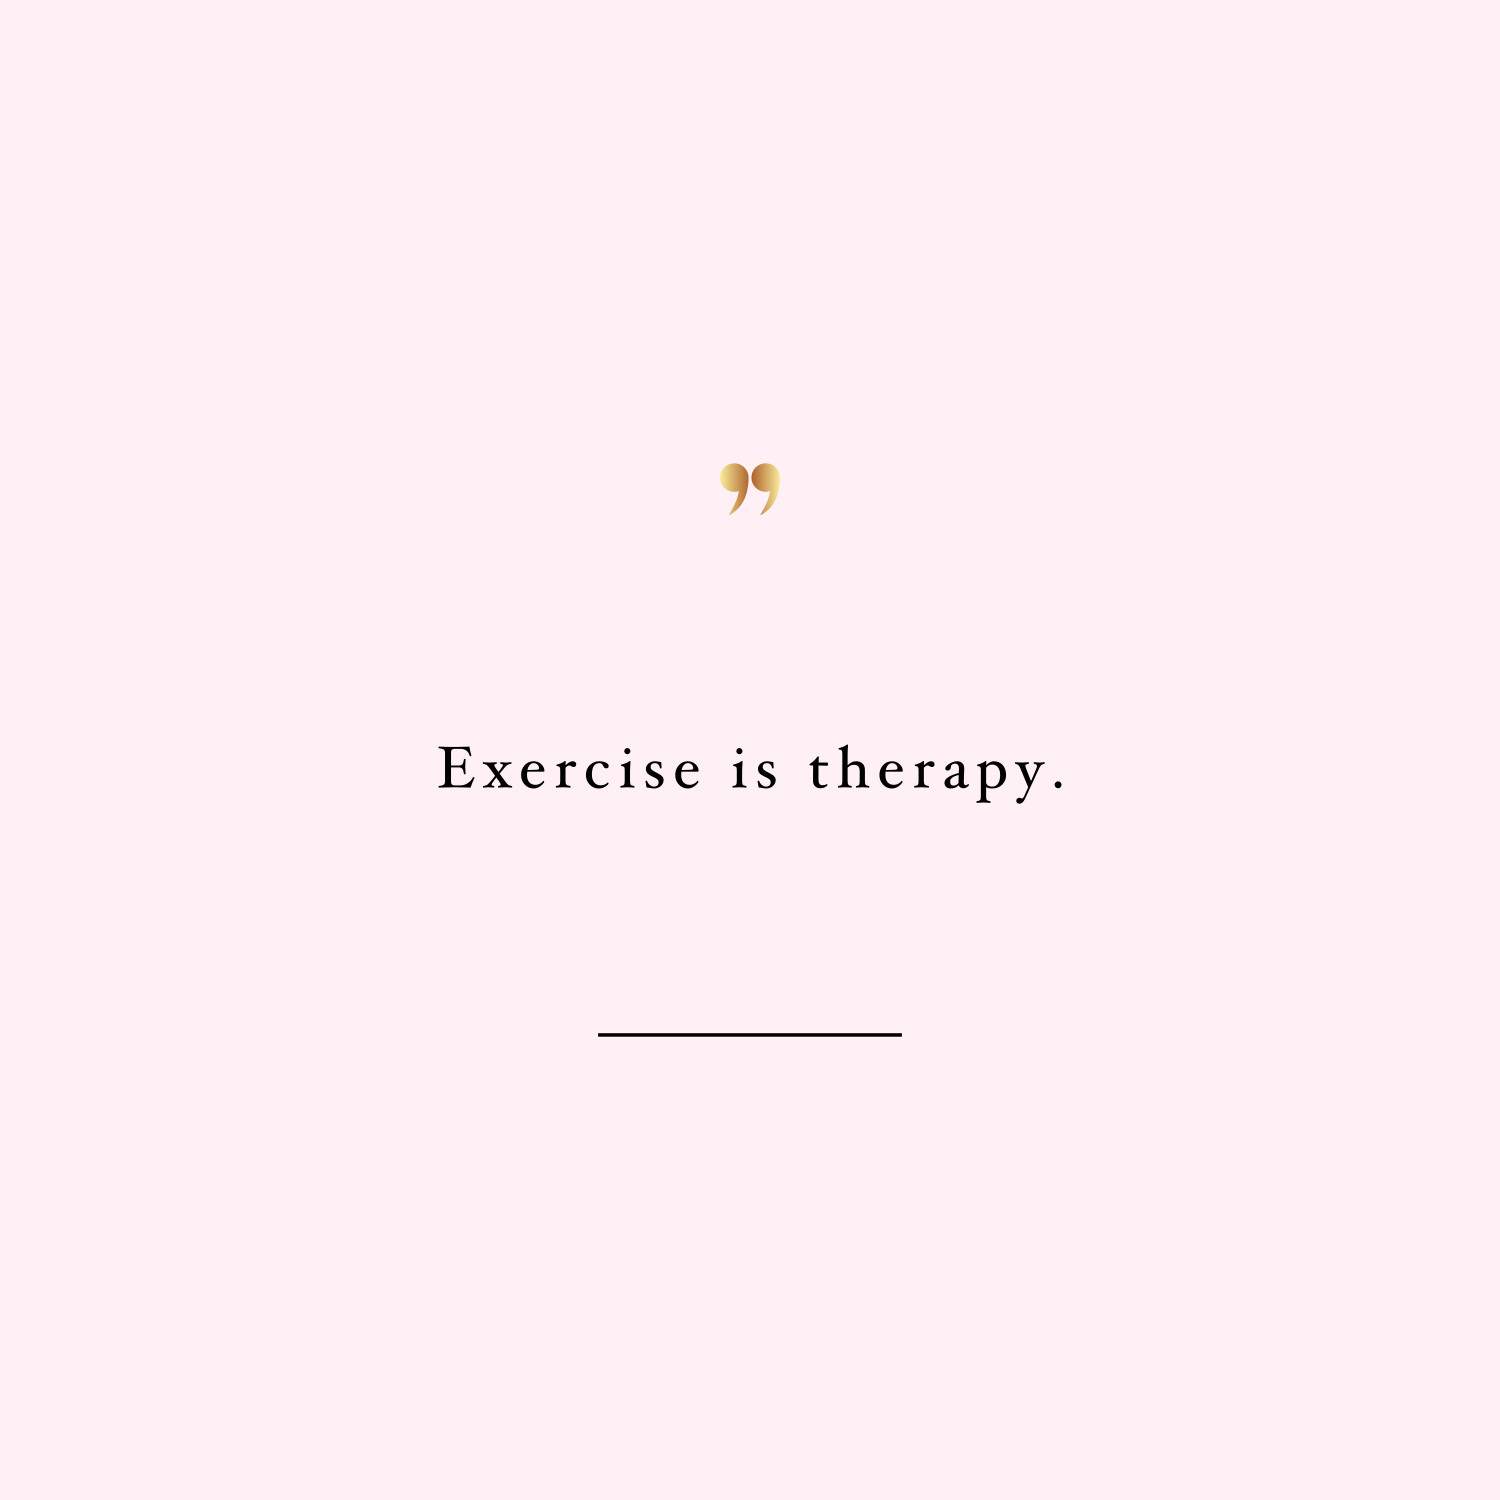 Exercise is therapy! Browse our collection of inspirational exercise quotes and get instant health and fitness motivation. Transform positive thoughts into positive actions and get fit, healthy and happy! https://www.spotebi.com/workout-motivation/exercise-is-therapy-health-and-fitness-motivation-quote/